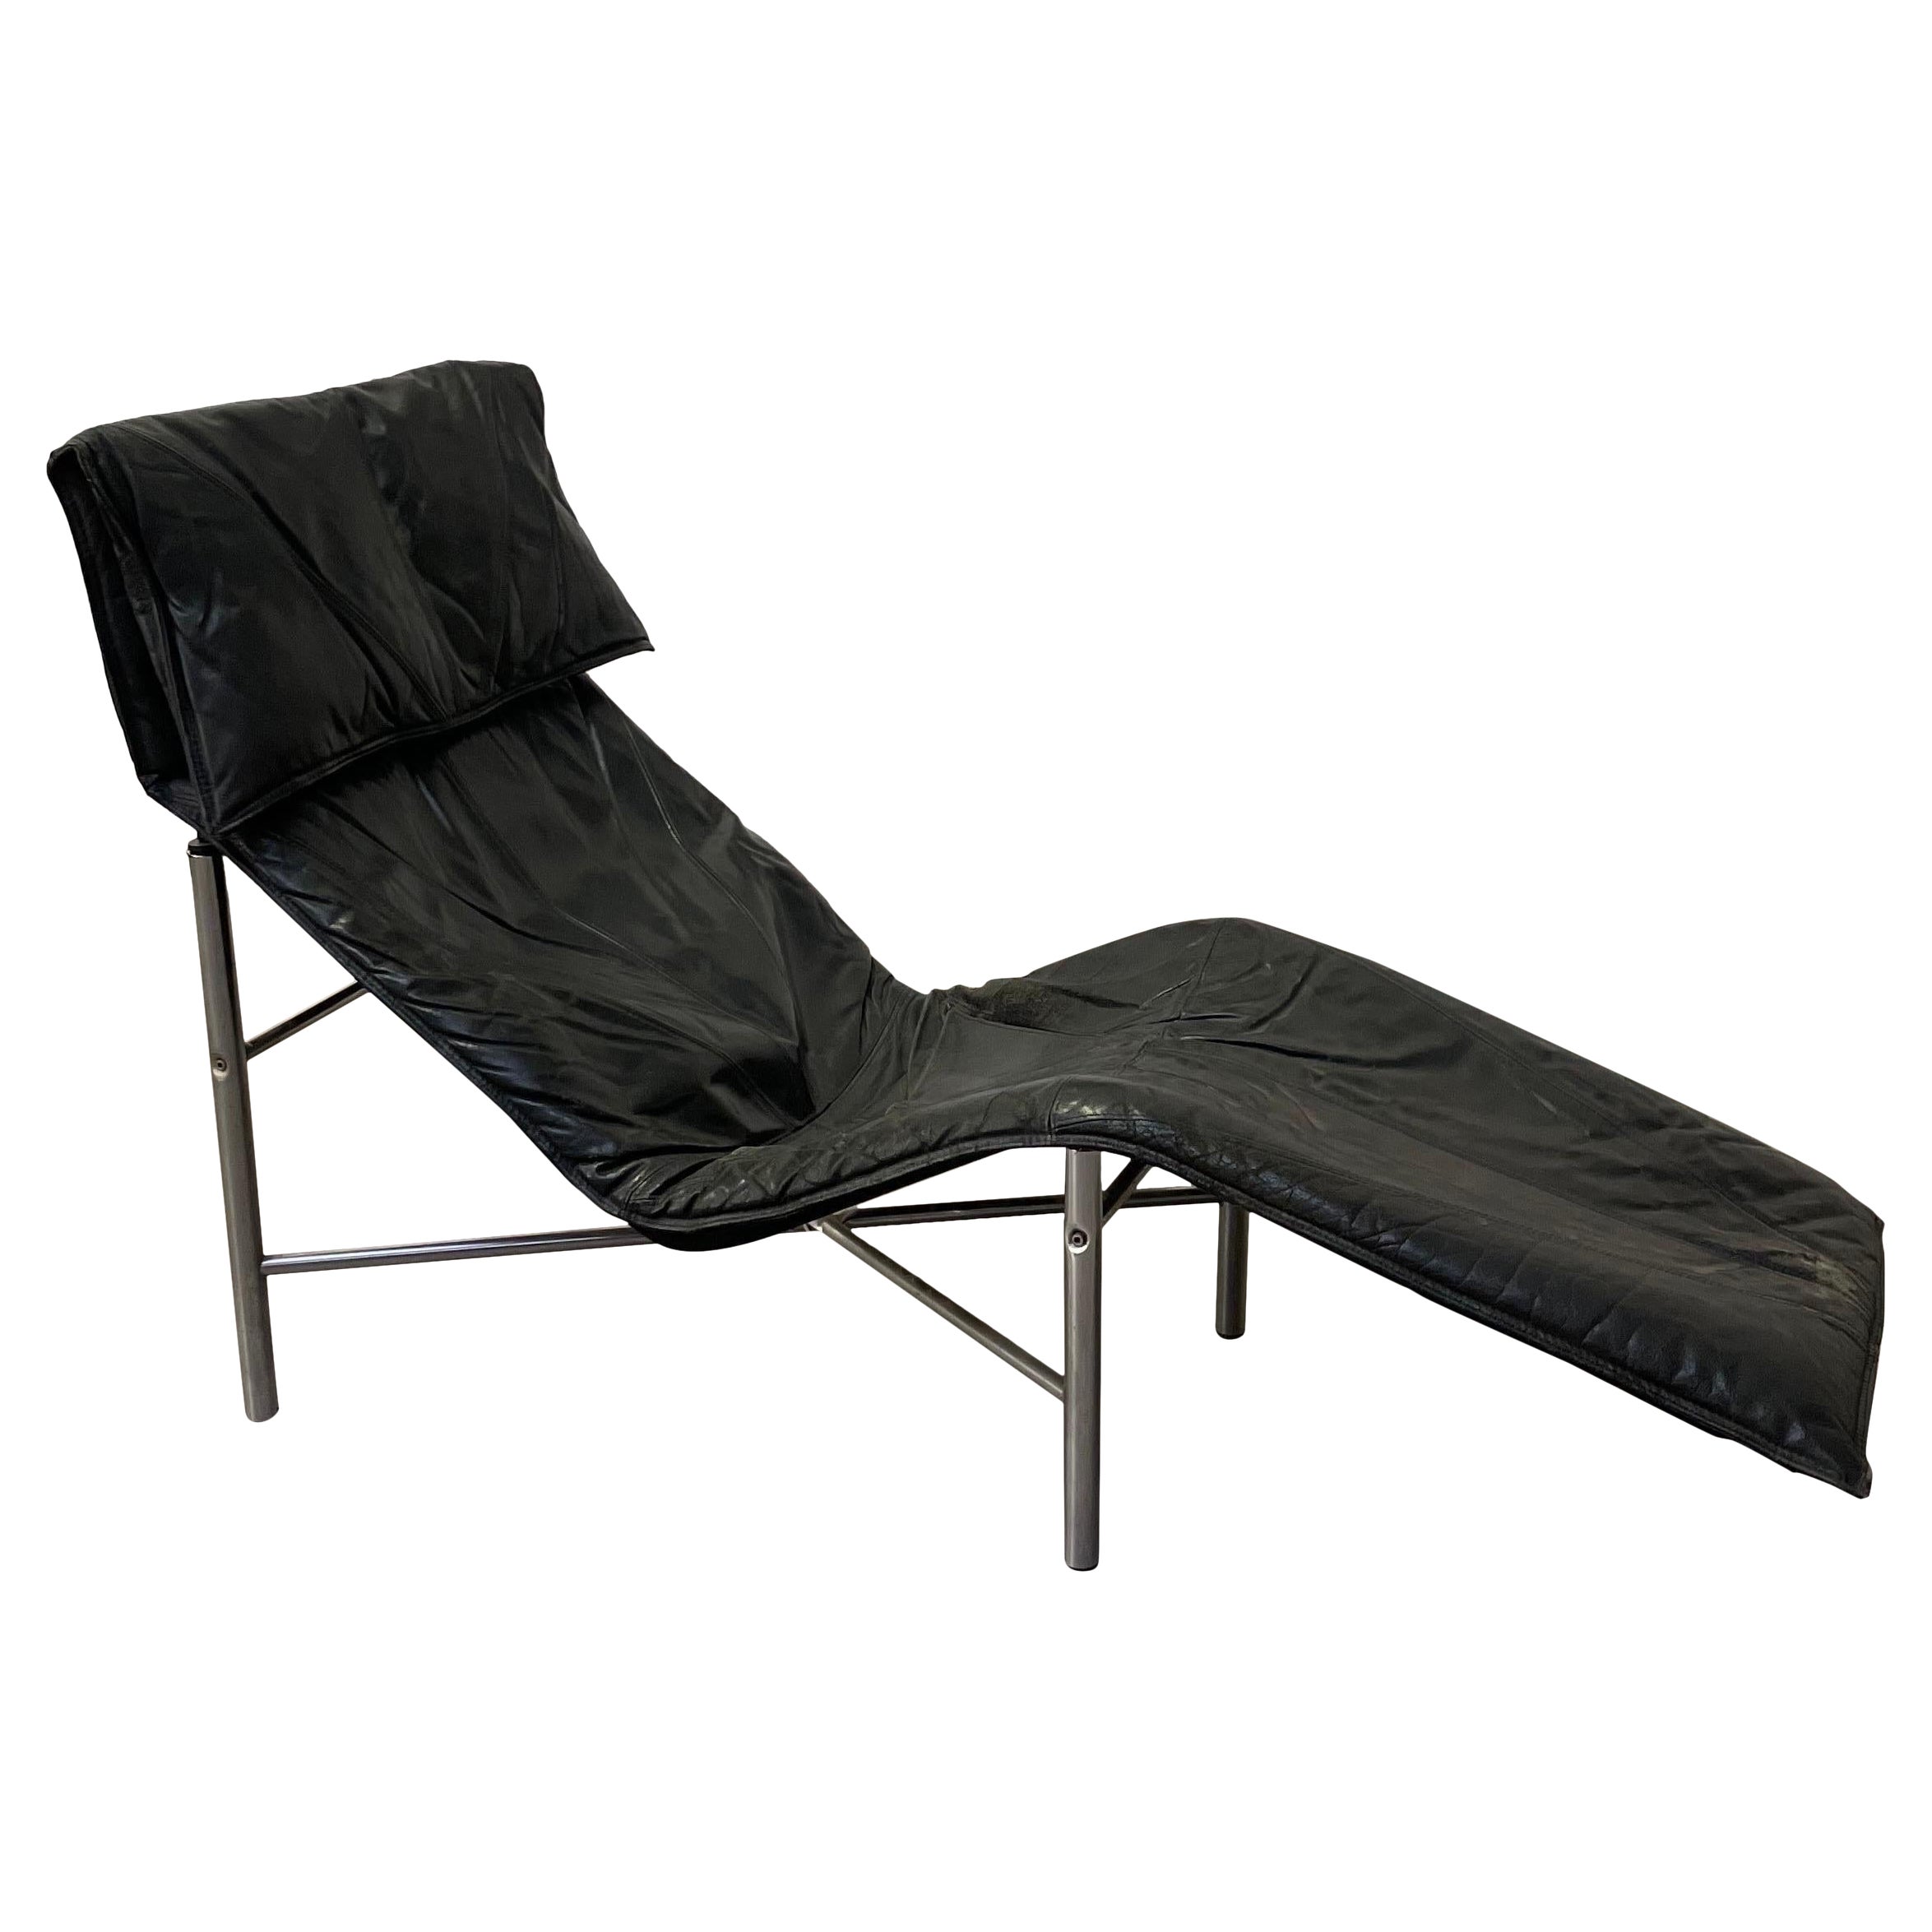 Ikea Chaise Longues - 17 For Sale at 1stDibs | ikea leather chaise lounge,  chaise chair ikea, vintage ikea chaise lounge